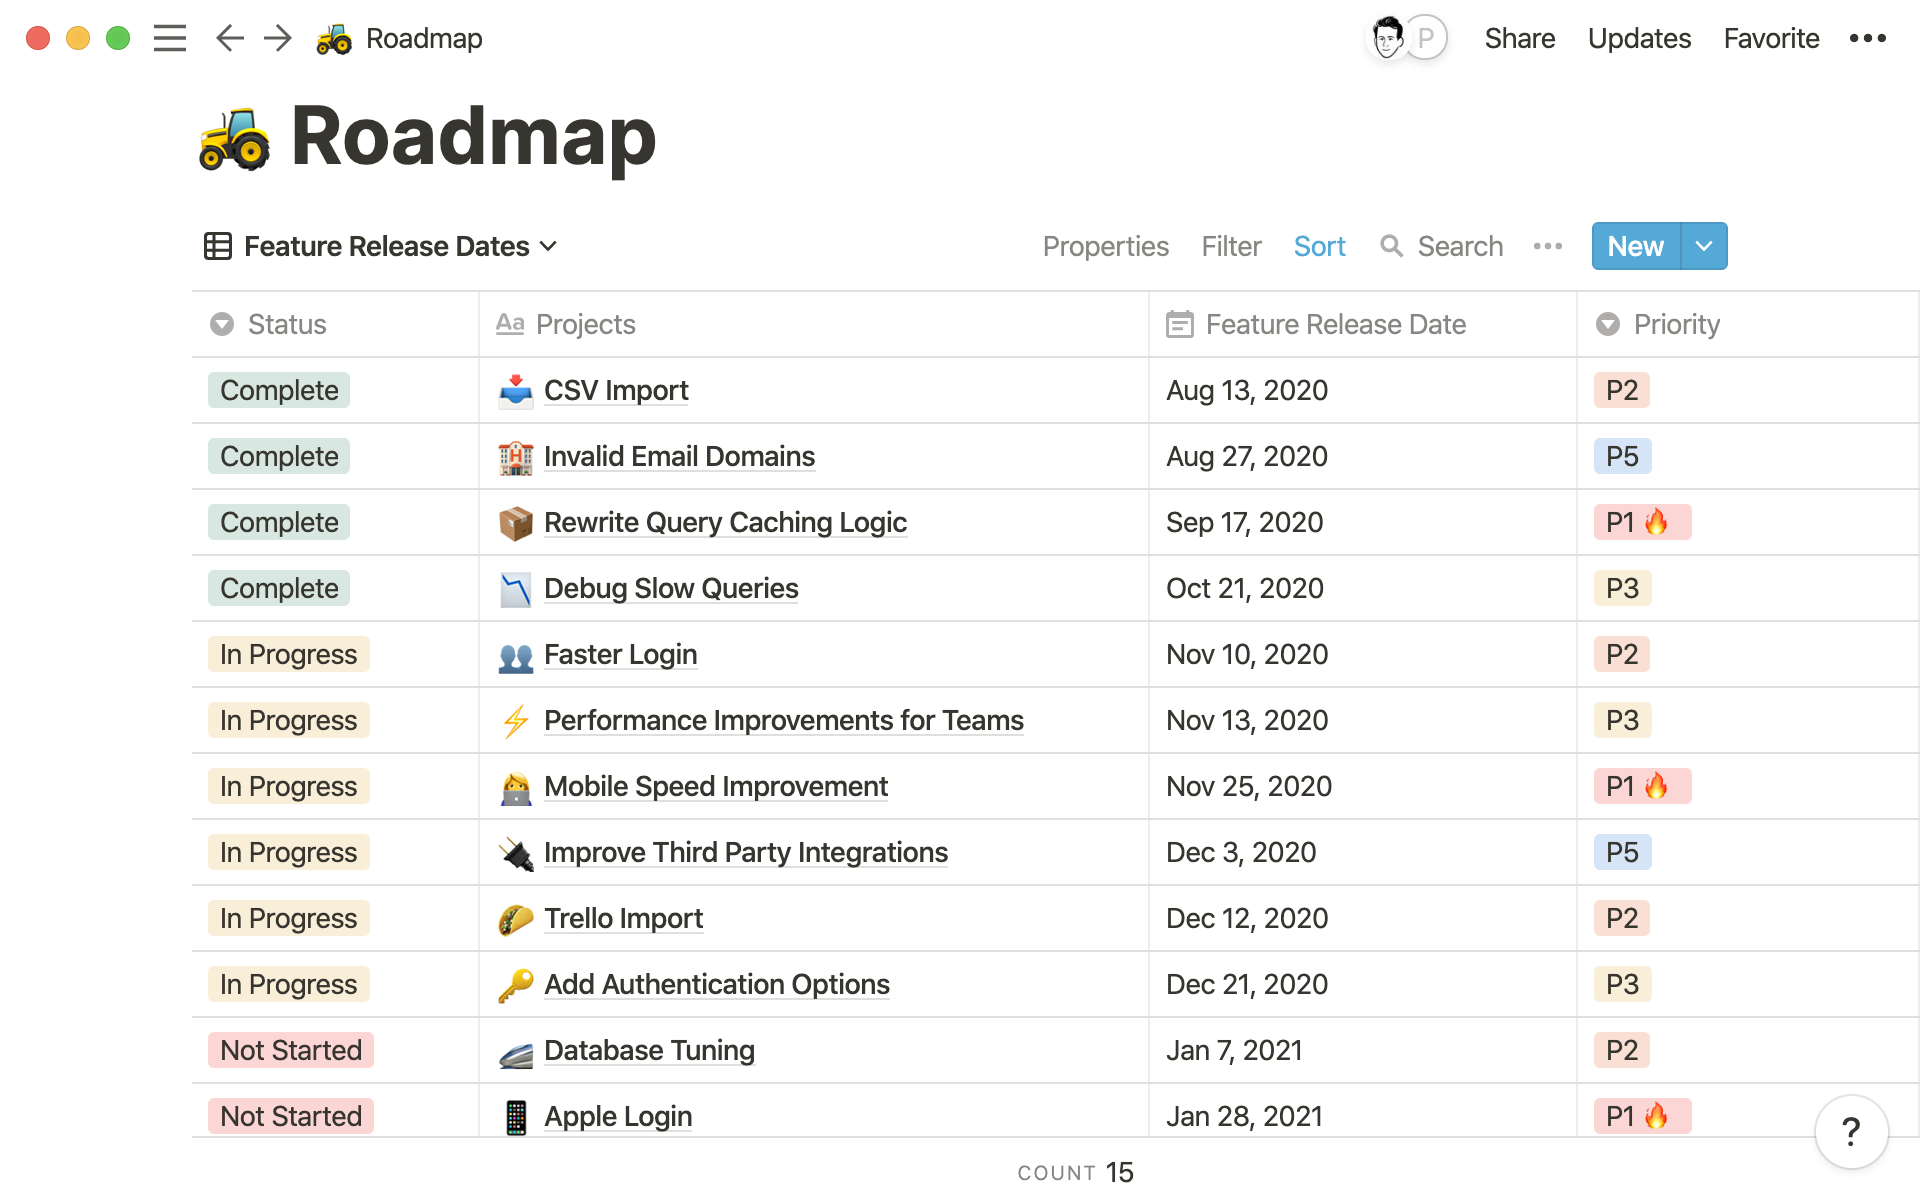 A public roadmap gives customers clarity into what you’re building and when it’s launching.